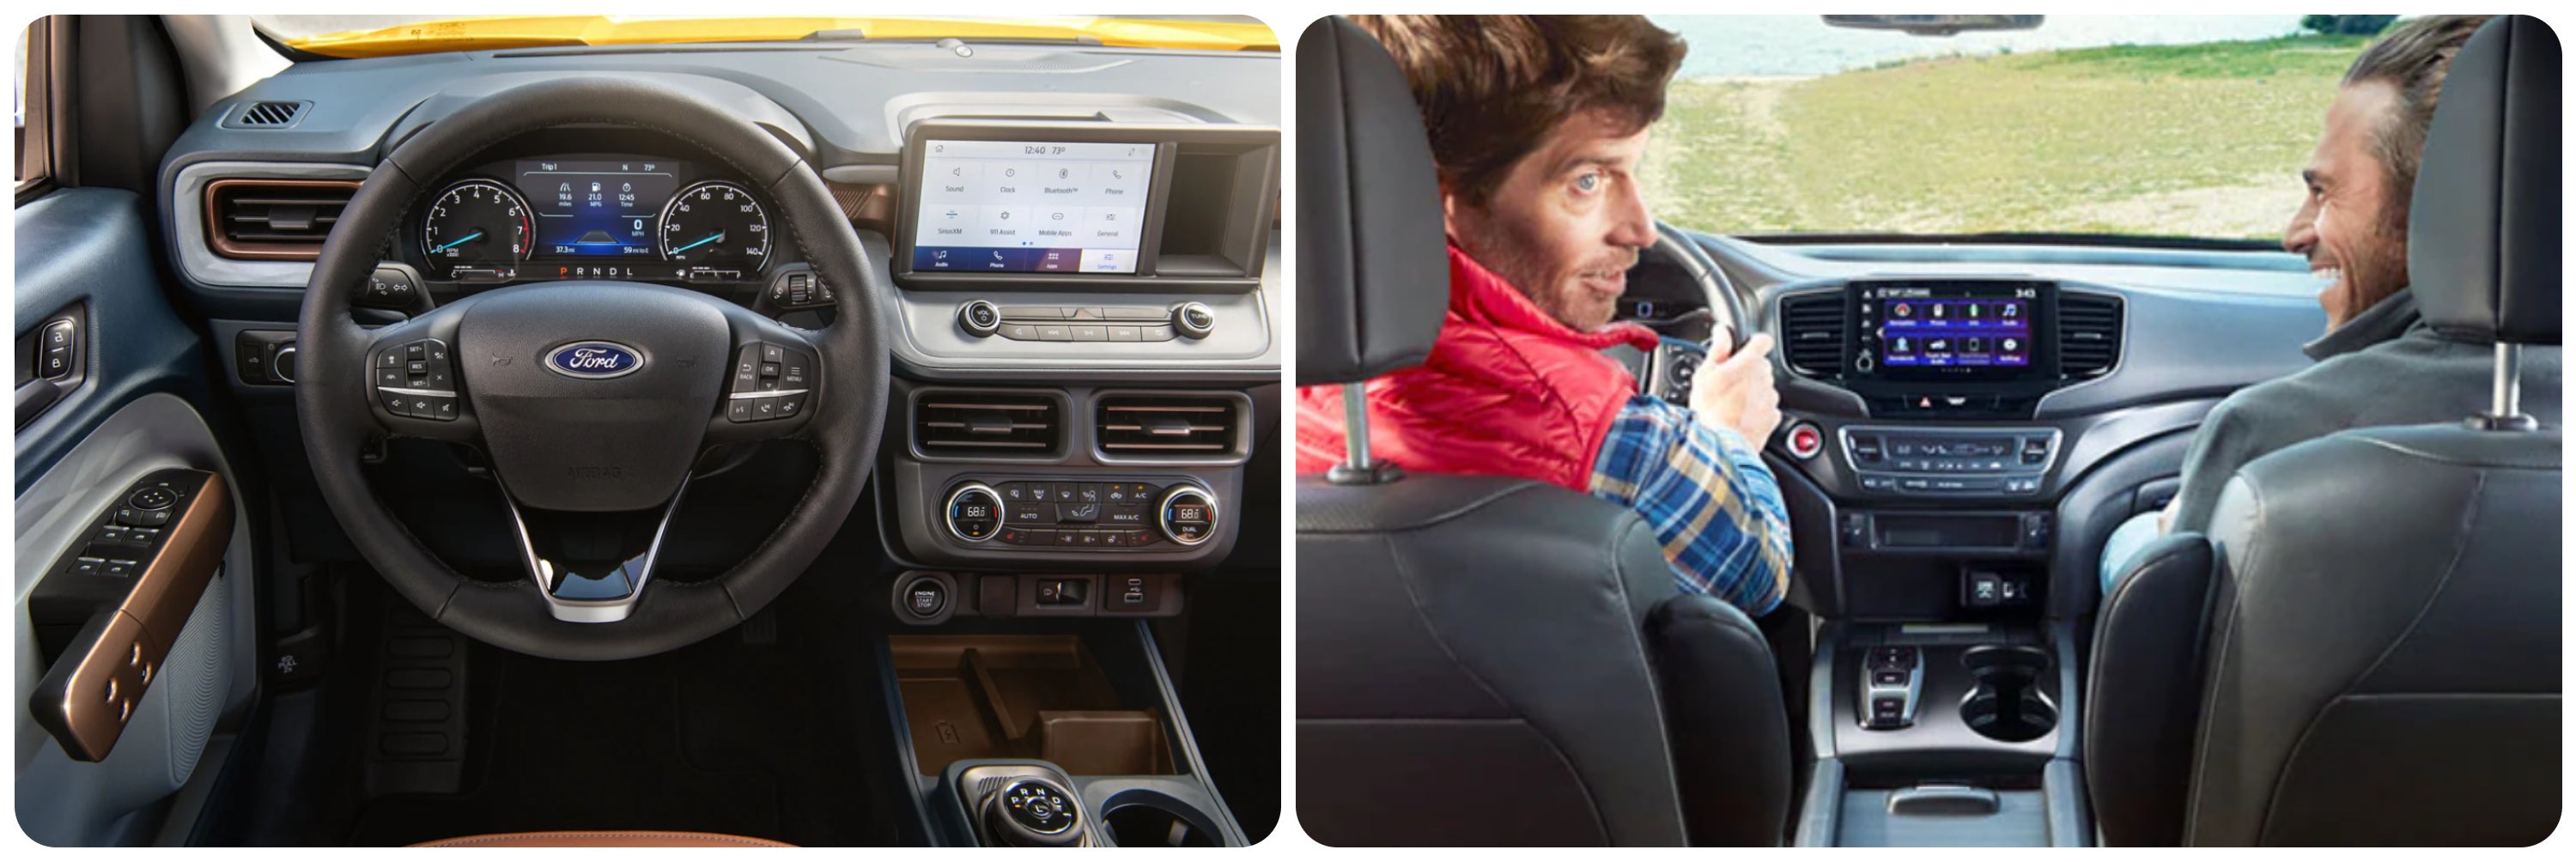 On the left a view of the dash of a 2022 Ford Maverick. On the right two men sit in the front seats of a 2022 Honda Ridgeline.